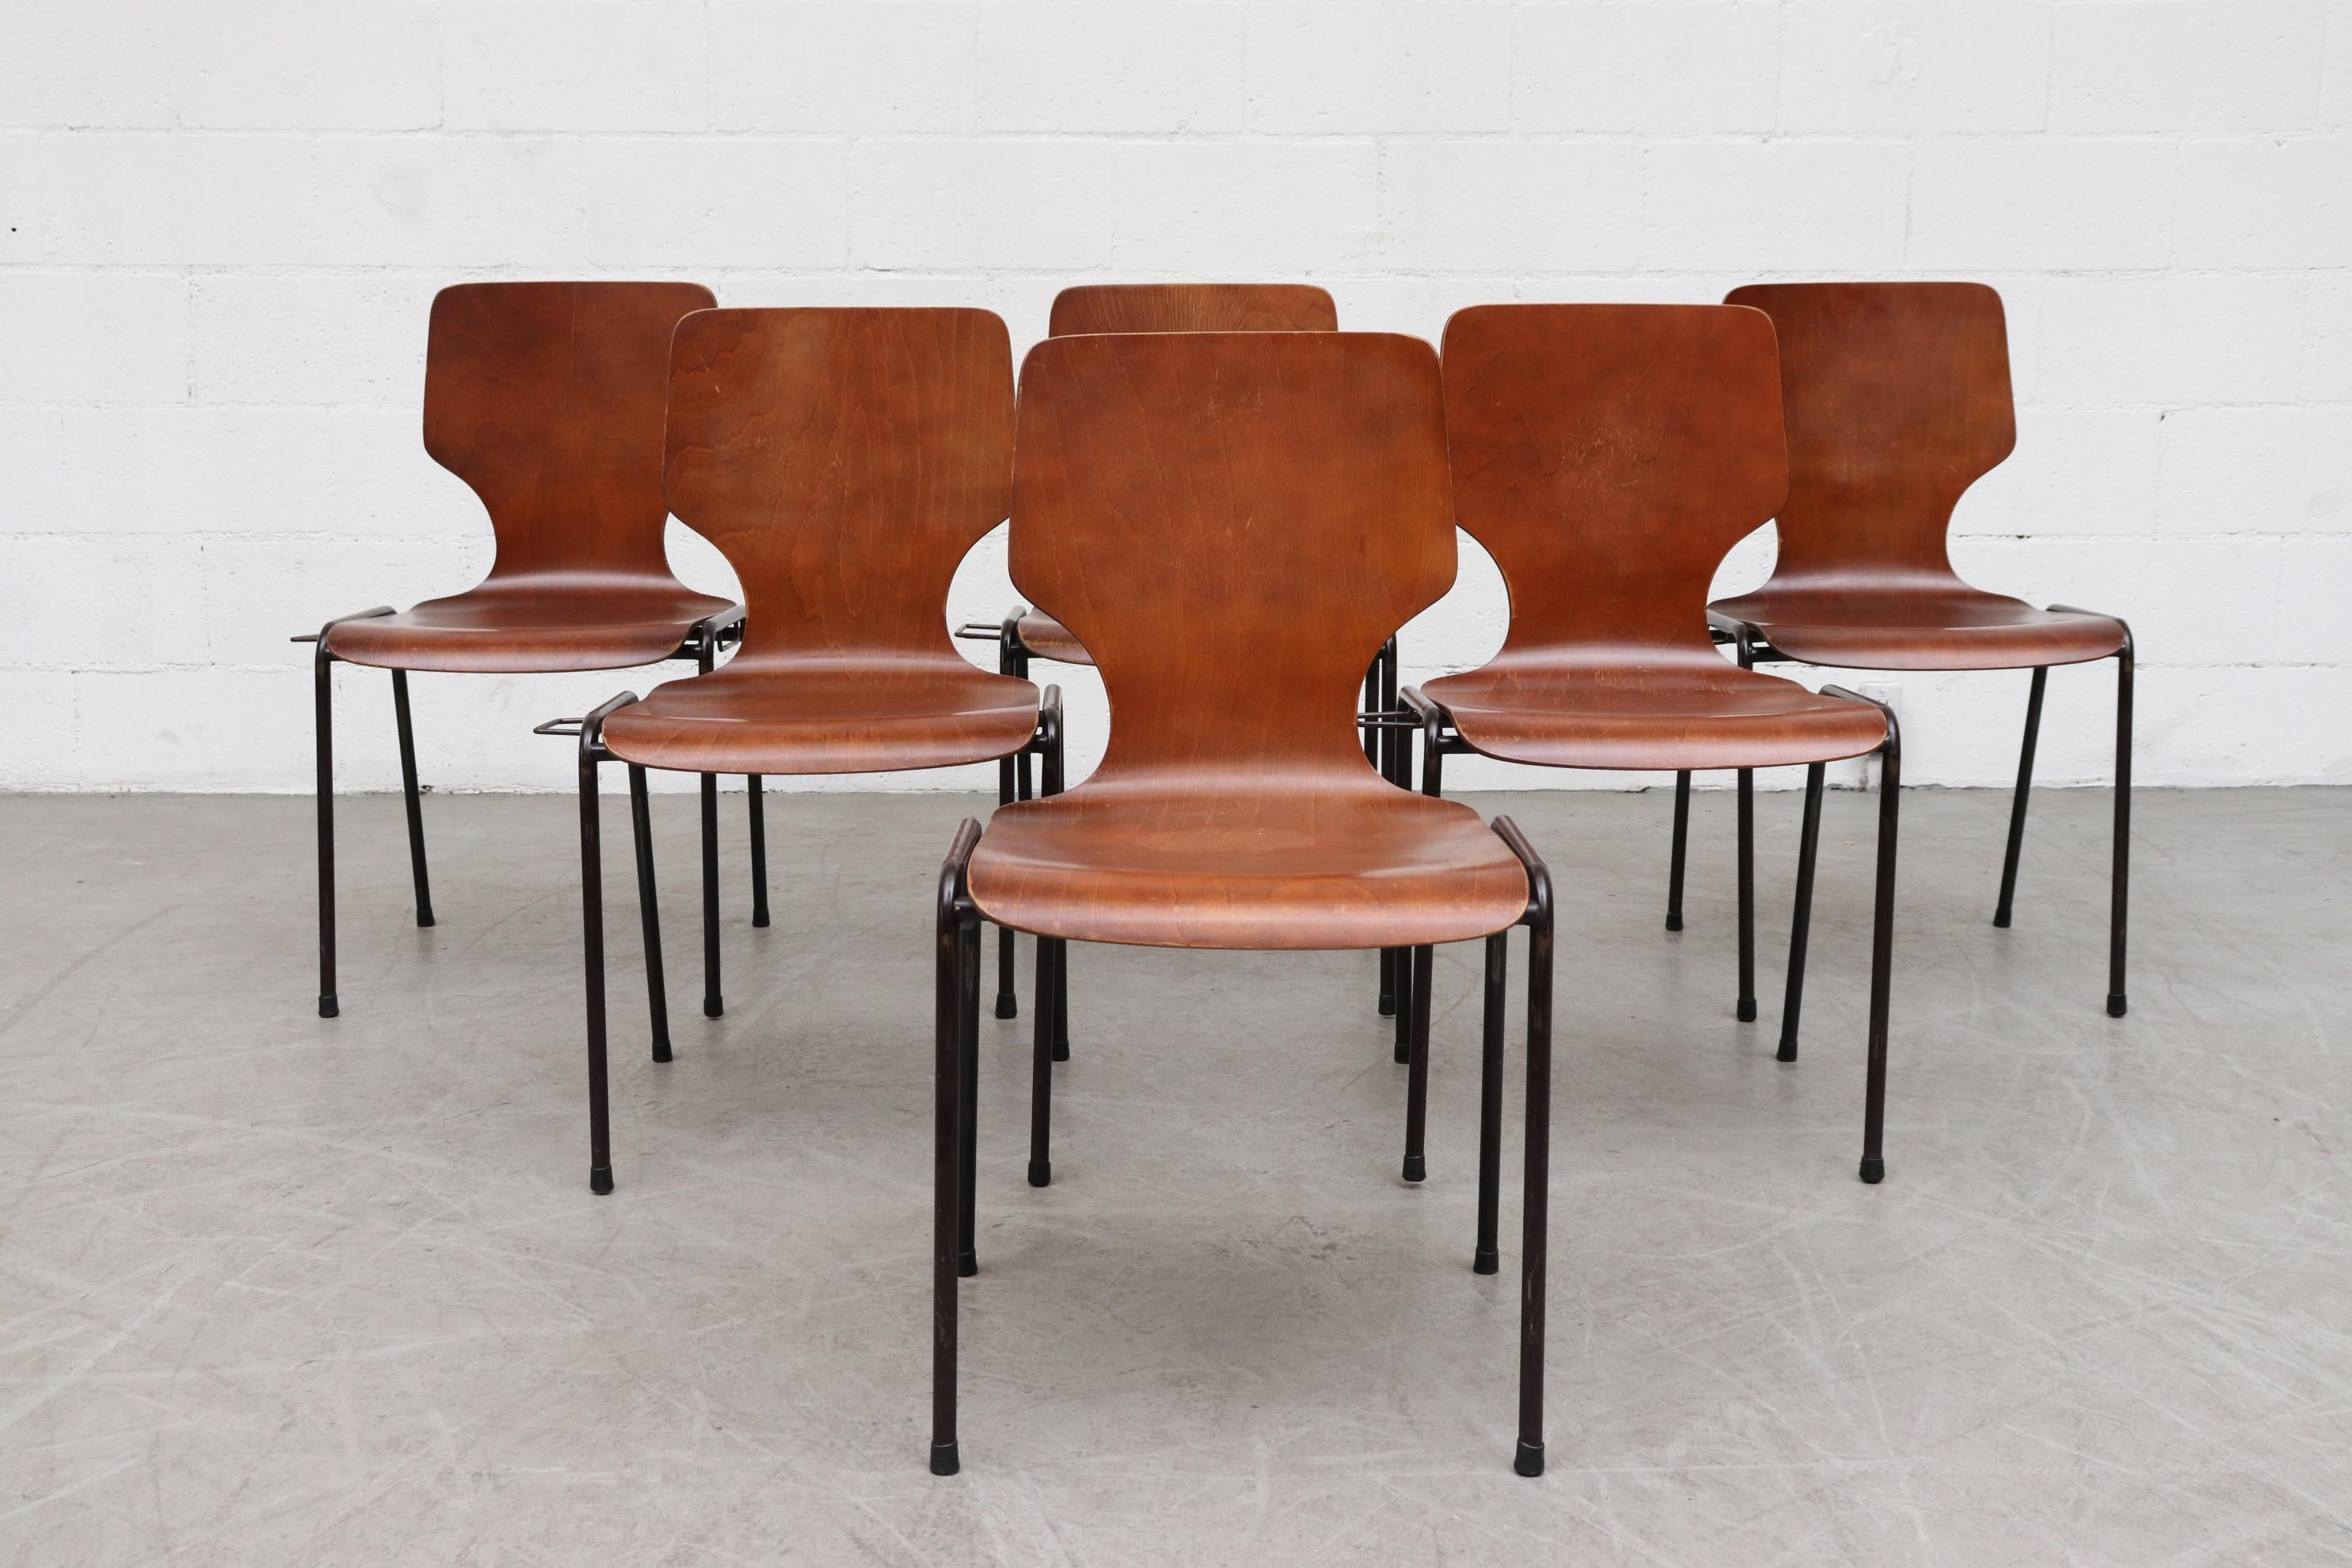 Fritz Hansen butterfly style teak toned wingback stacking chairs. Beautifully curved shell seat with tubular enameled metal frame. Chairs can interlock to create a stationary row. In original condition with visible signs of wear including some